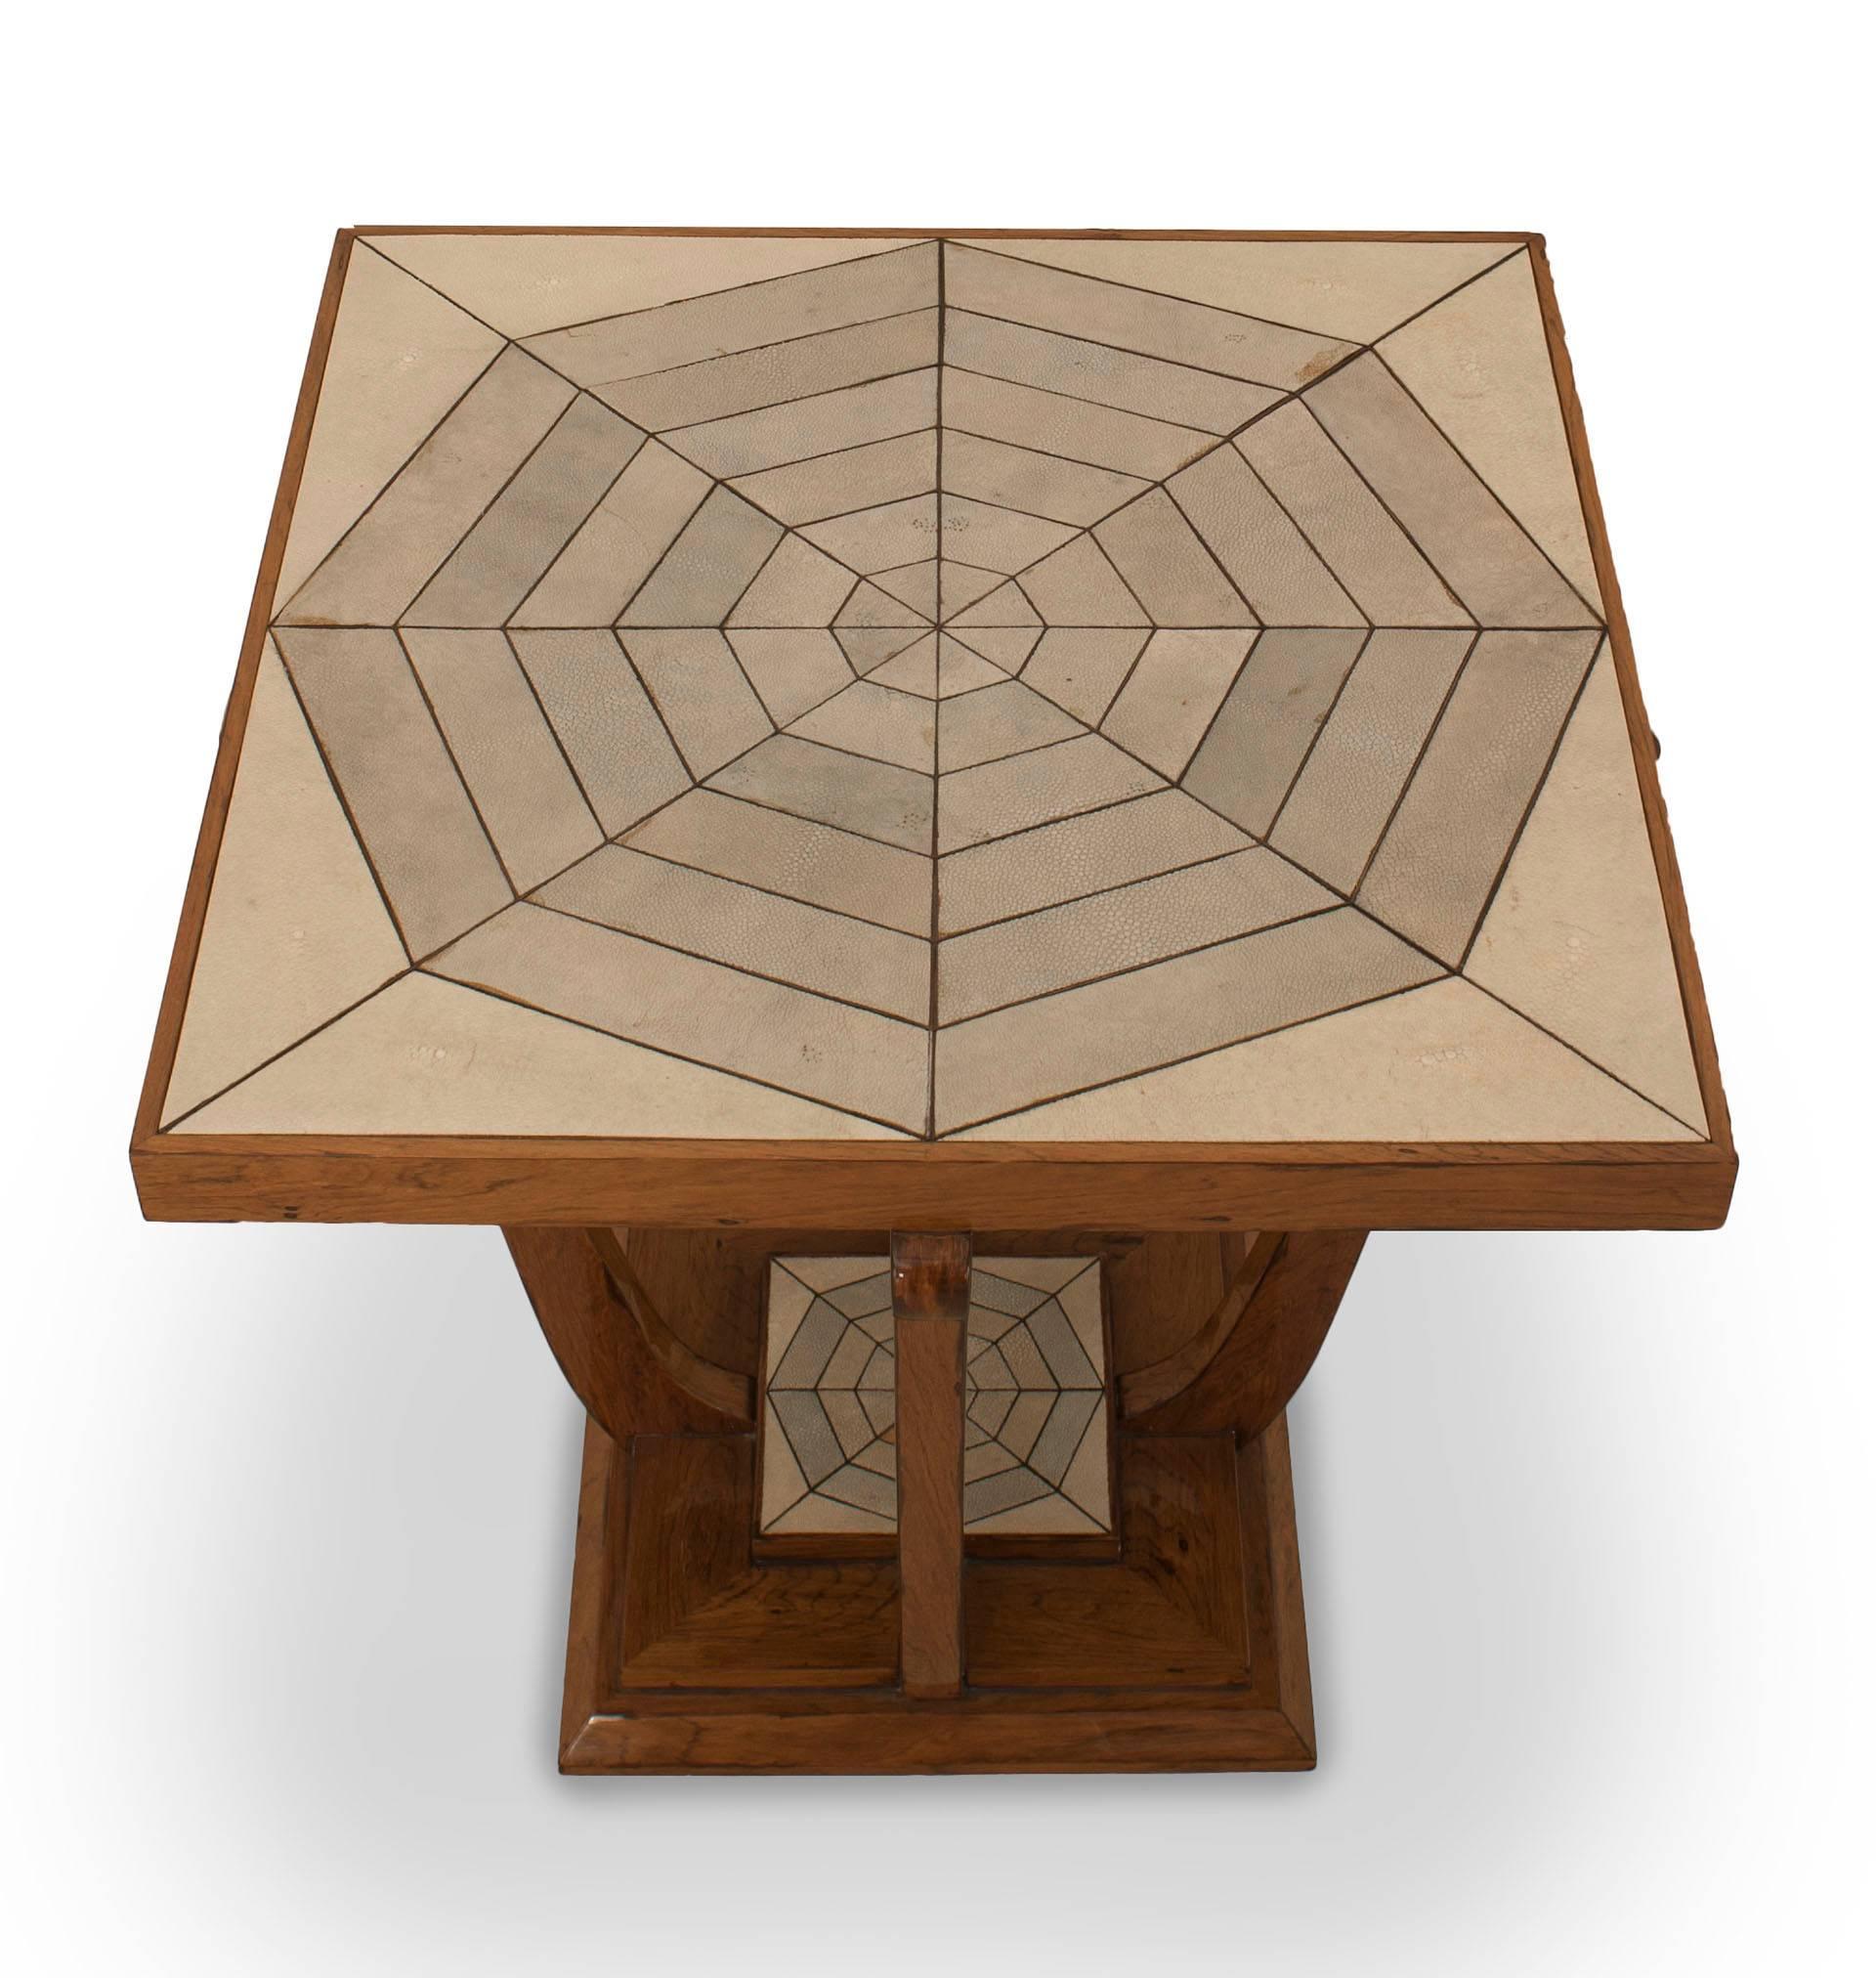 French Art Deco, 1930s cherrywood square end table with an inset beige and light green shagreen top and bottom shelf with an octagonal design.
  